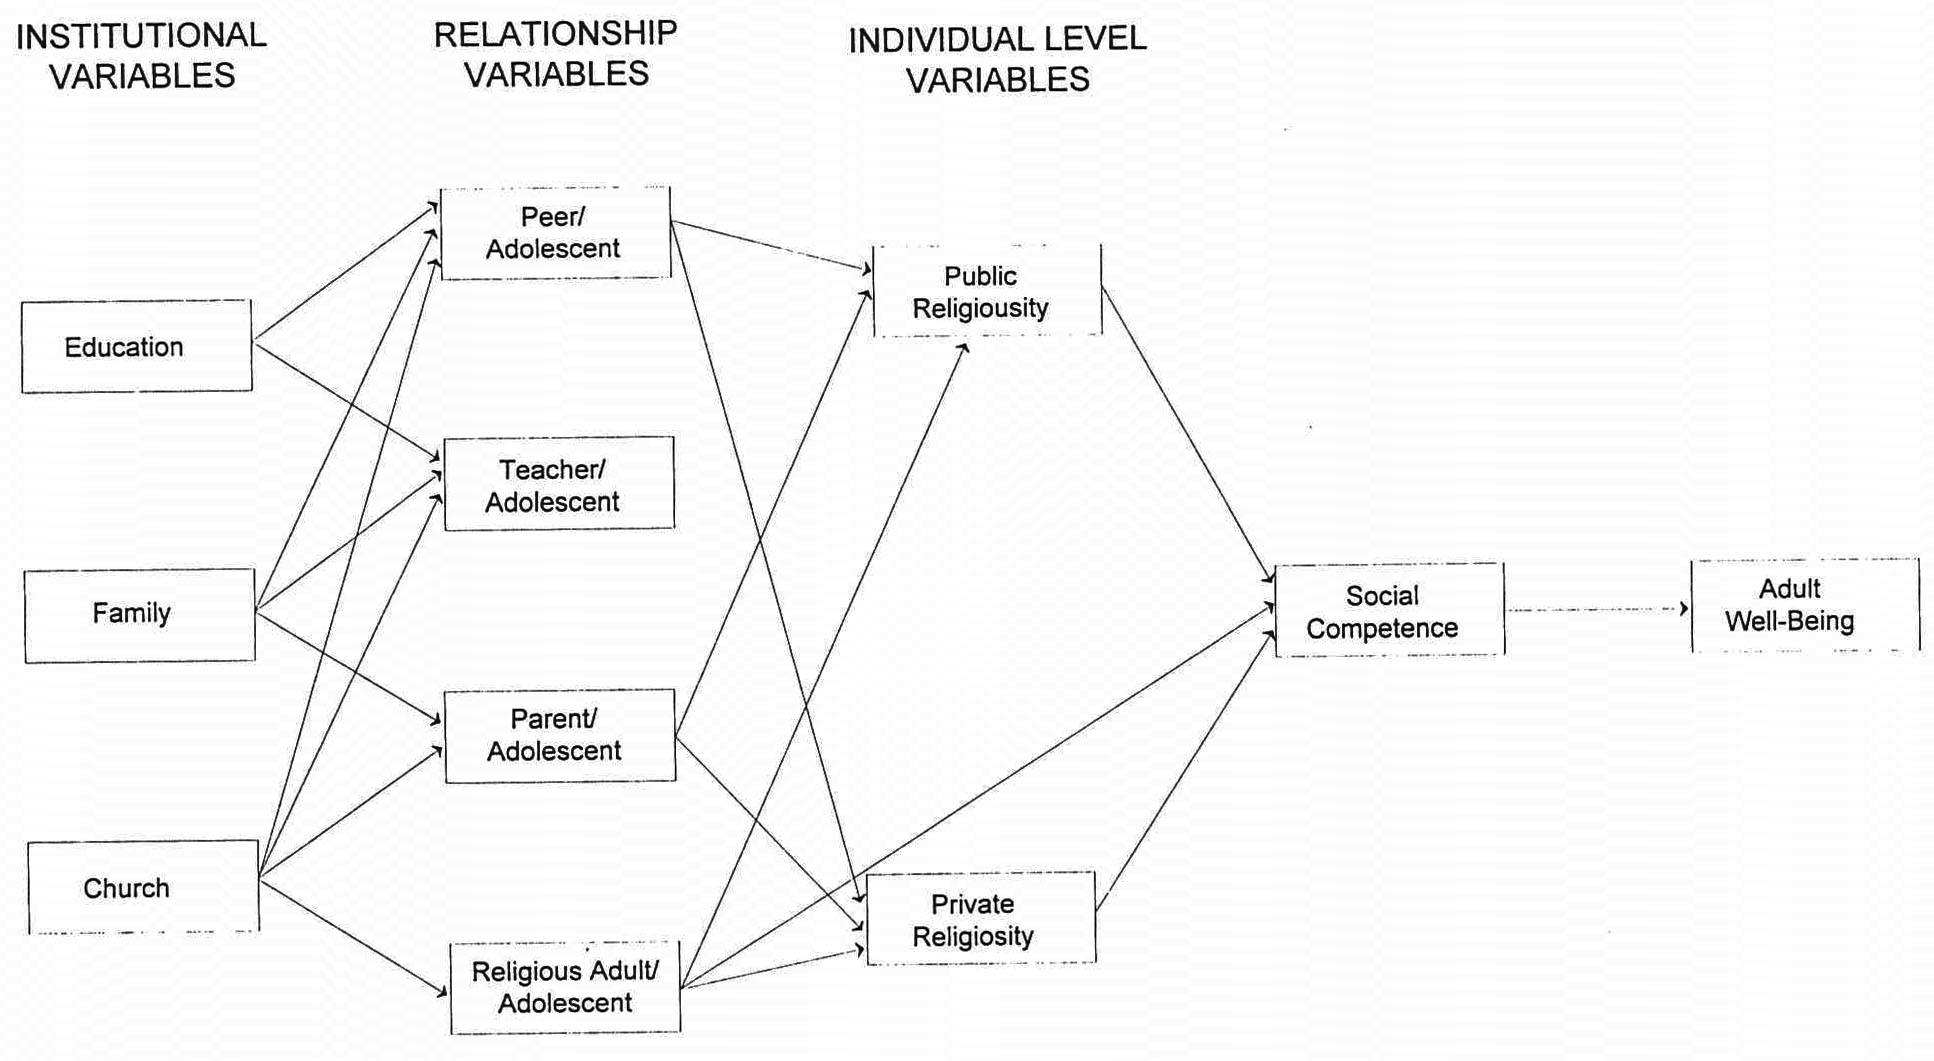 Model of Institutional, Relational, and Individual Variables Effects on Young Adult Well-Being